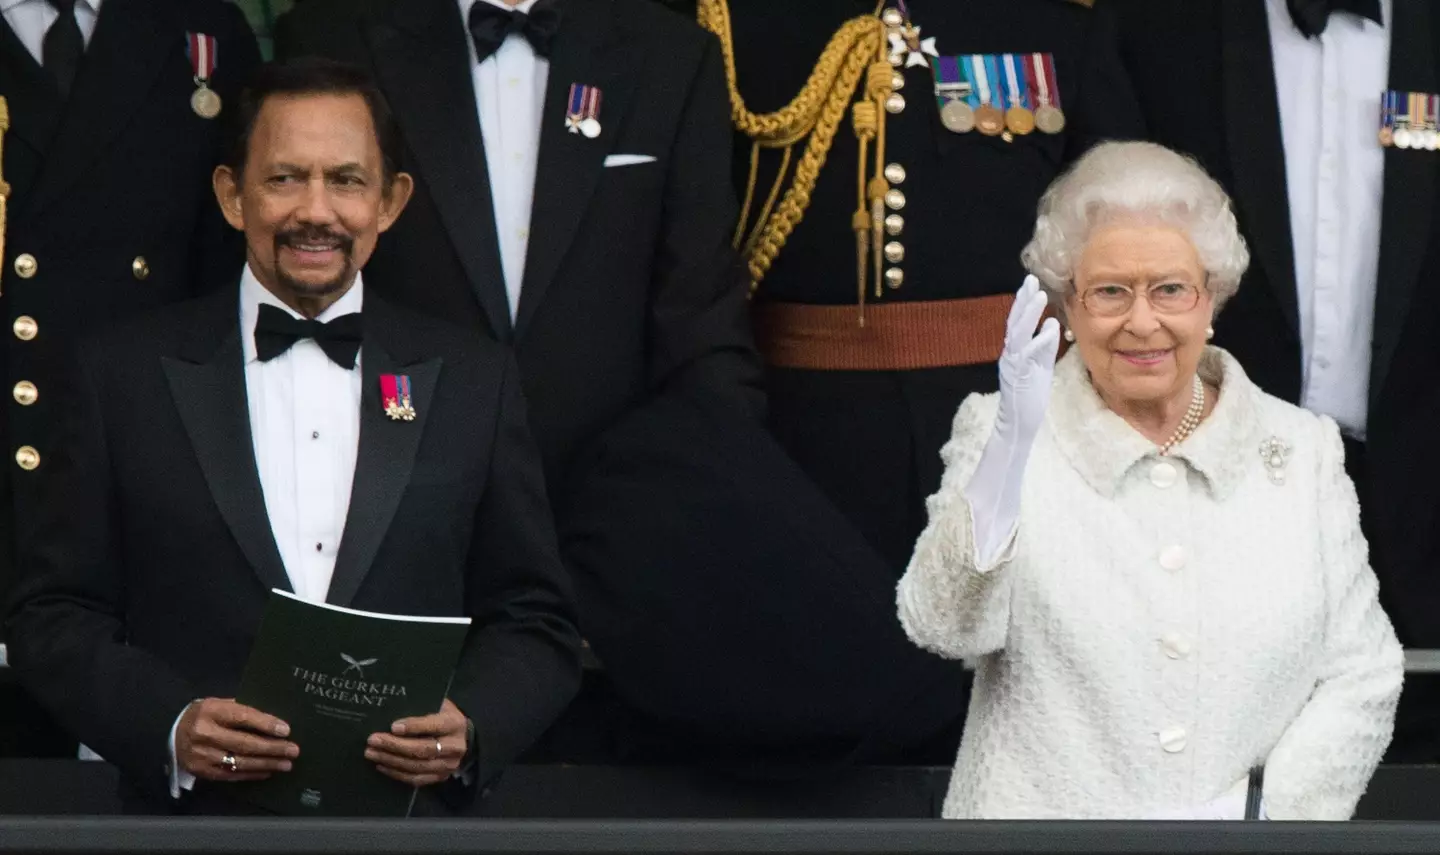 The Sultan of Brunei has become the longest-serving monarch after The Queen's death this Thursday.